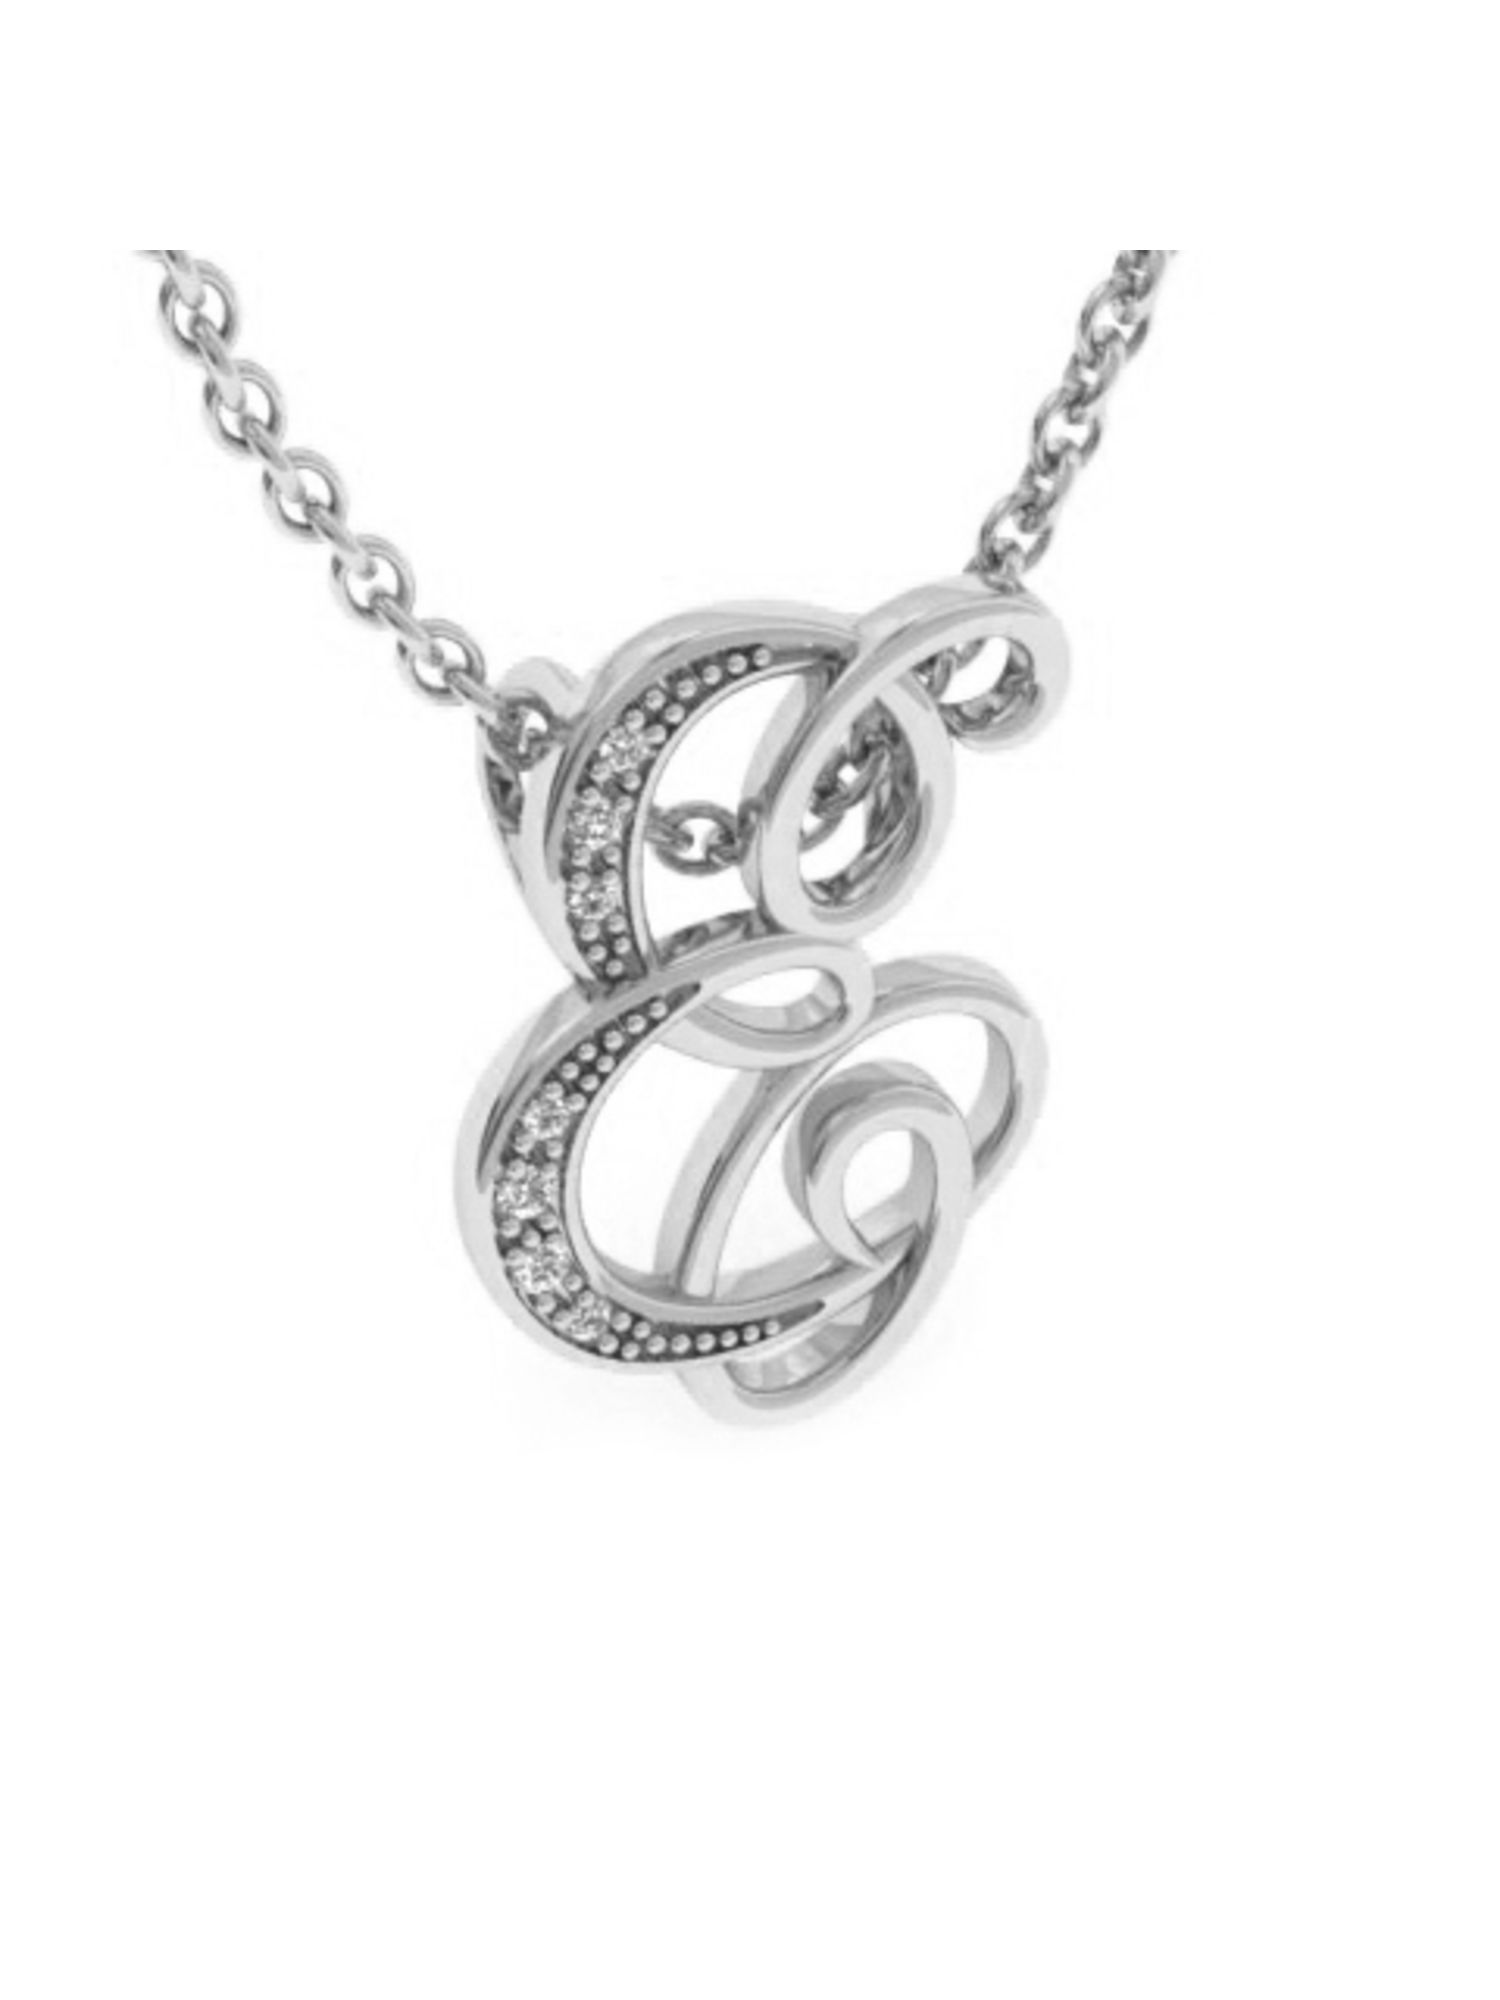 A Initial Necklace In White Gold With 6 Diamonds With Free Chain | eBay